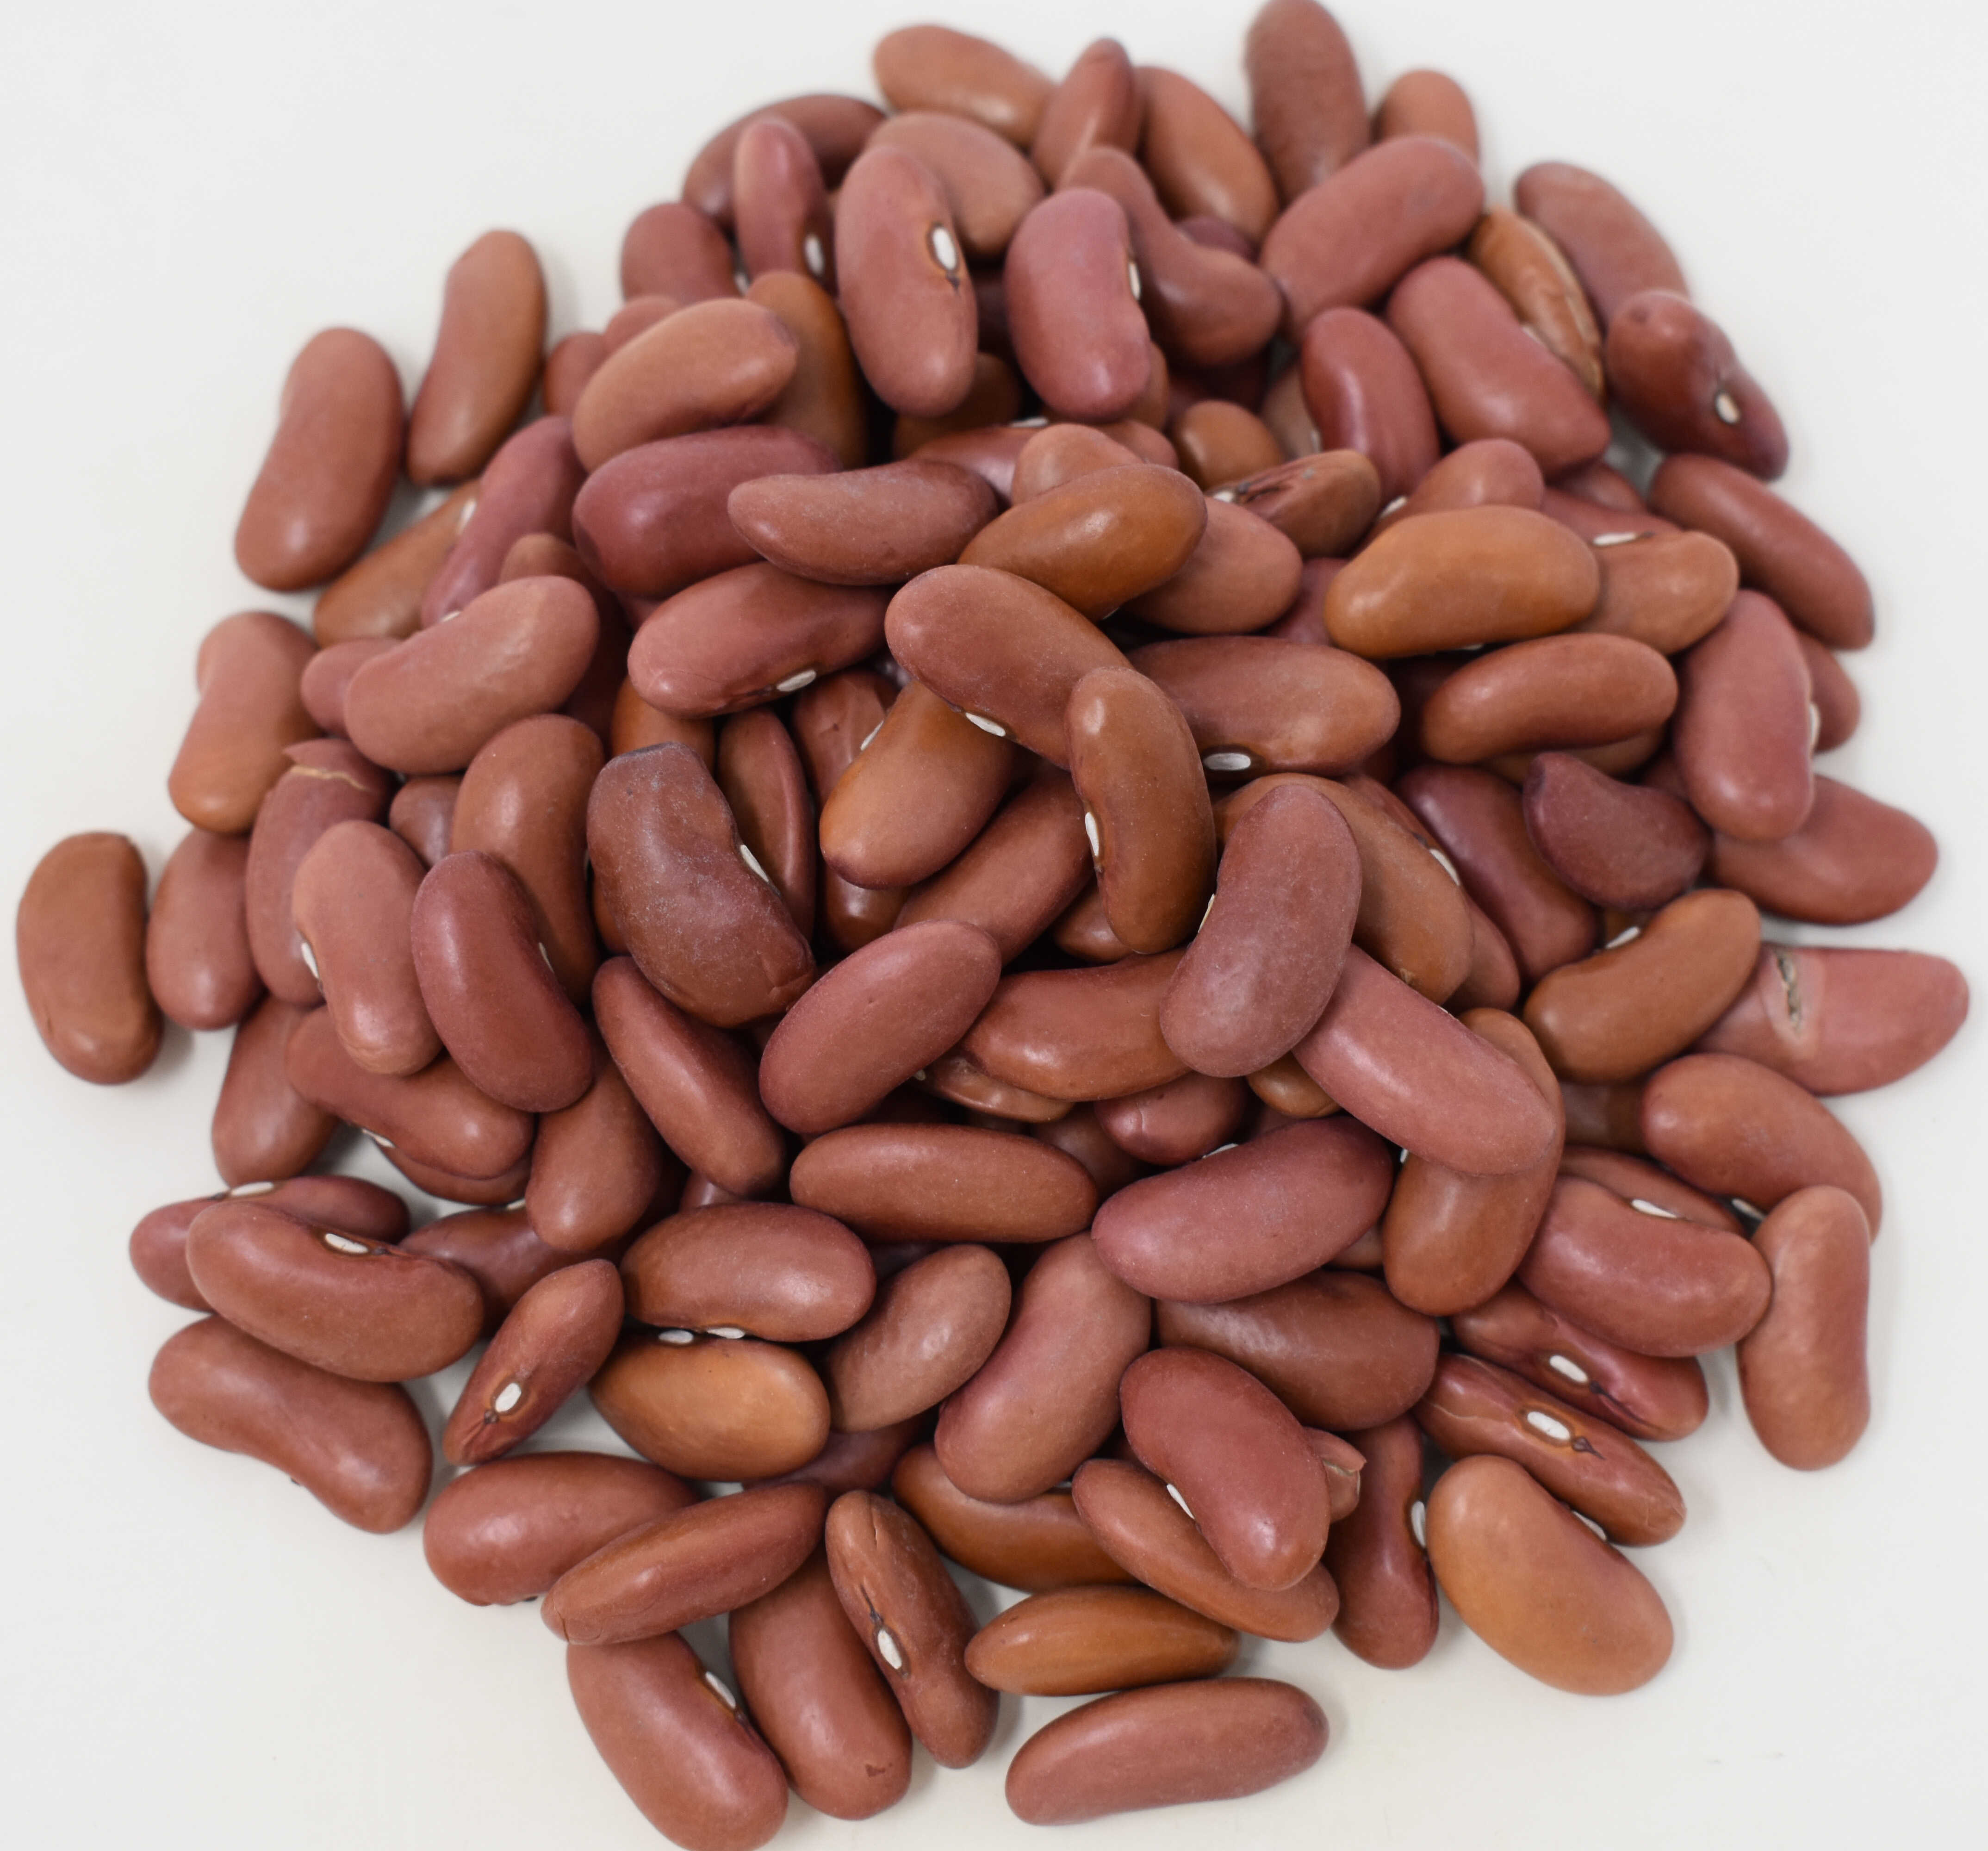 Red Kidney Beans - Top Photo